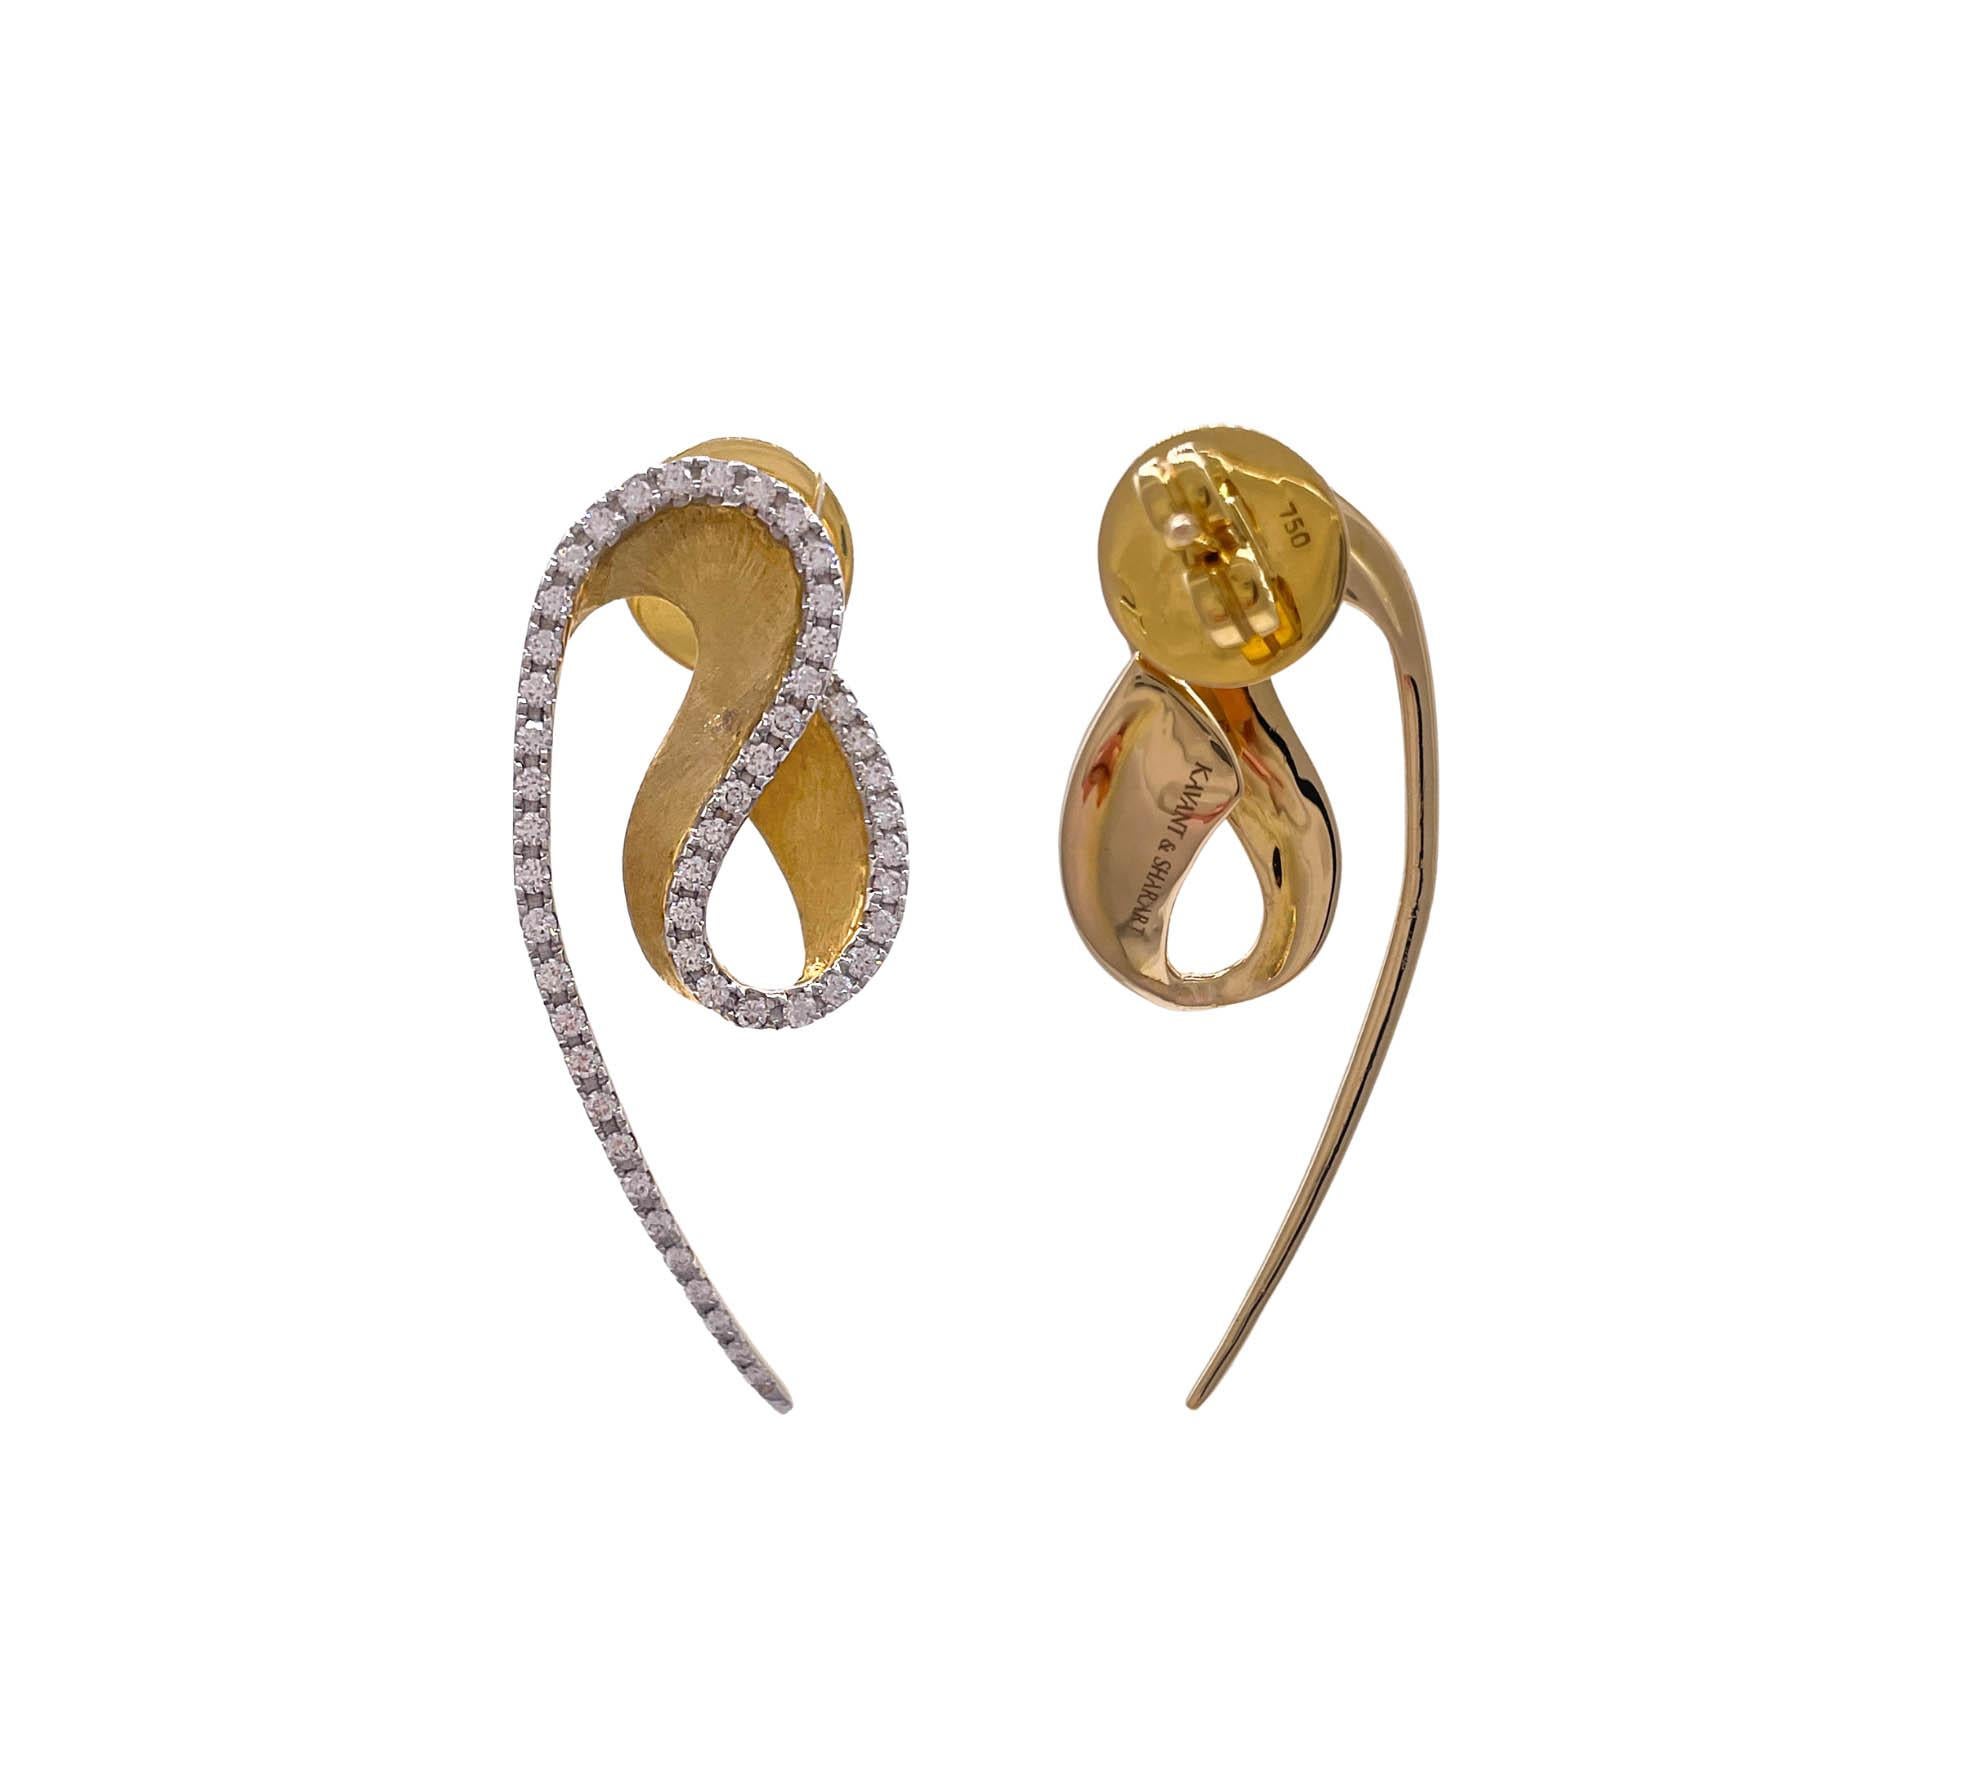 Kavant & Sharart 18k Yellow Gold Diamond Talay Wave Earring In Good Condition For Sale In Boca Raton, FL